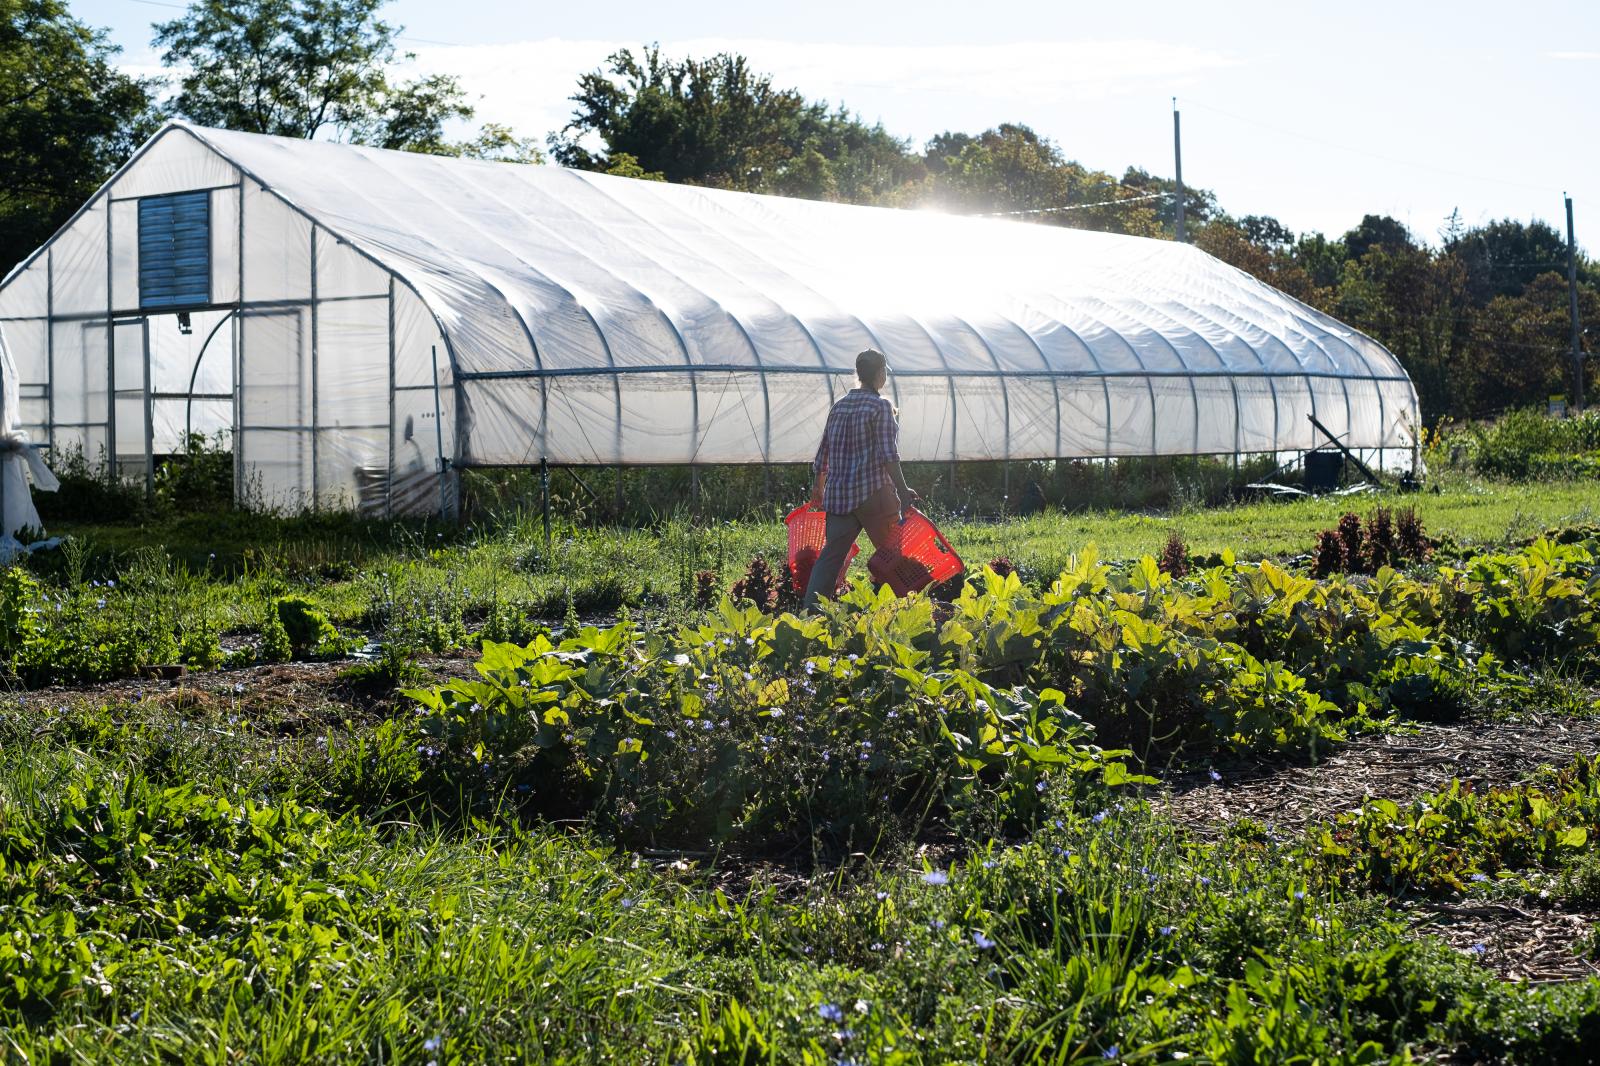 Image from Brady Family Farm - Jessie carries baskets of lettuce through the rows of...